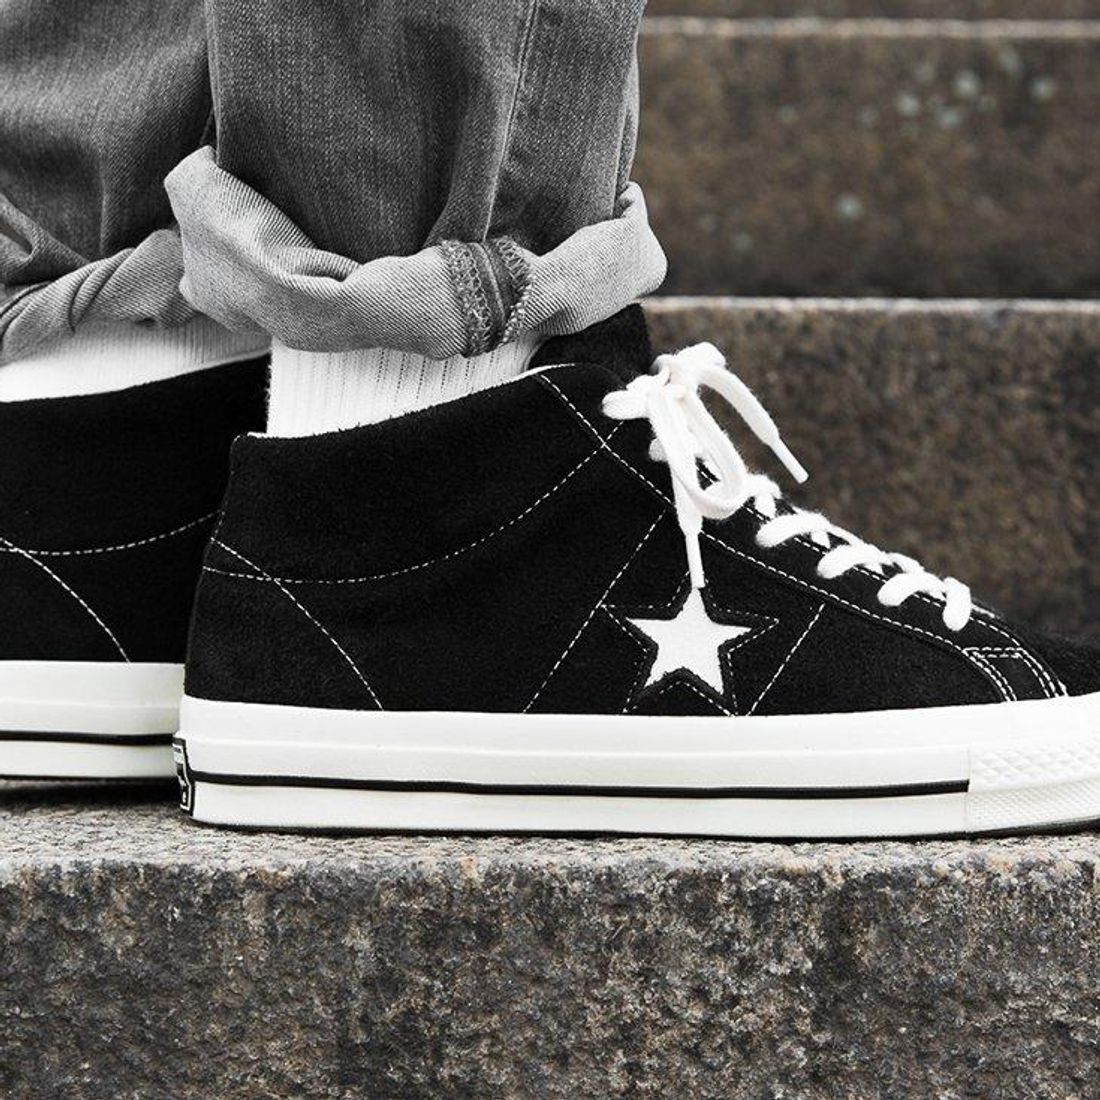 The Converse One Star Mid Releases Staple Colourways - Sneaker Freaker